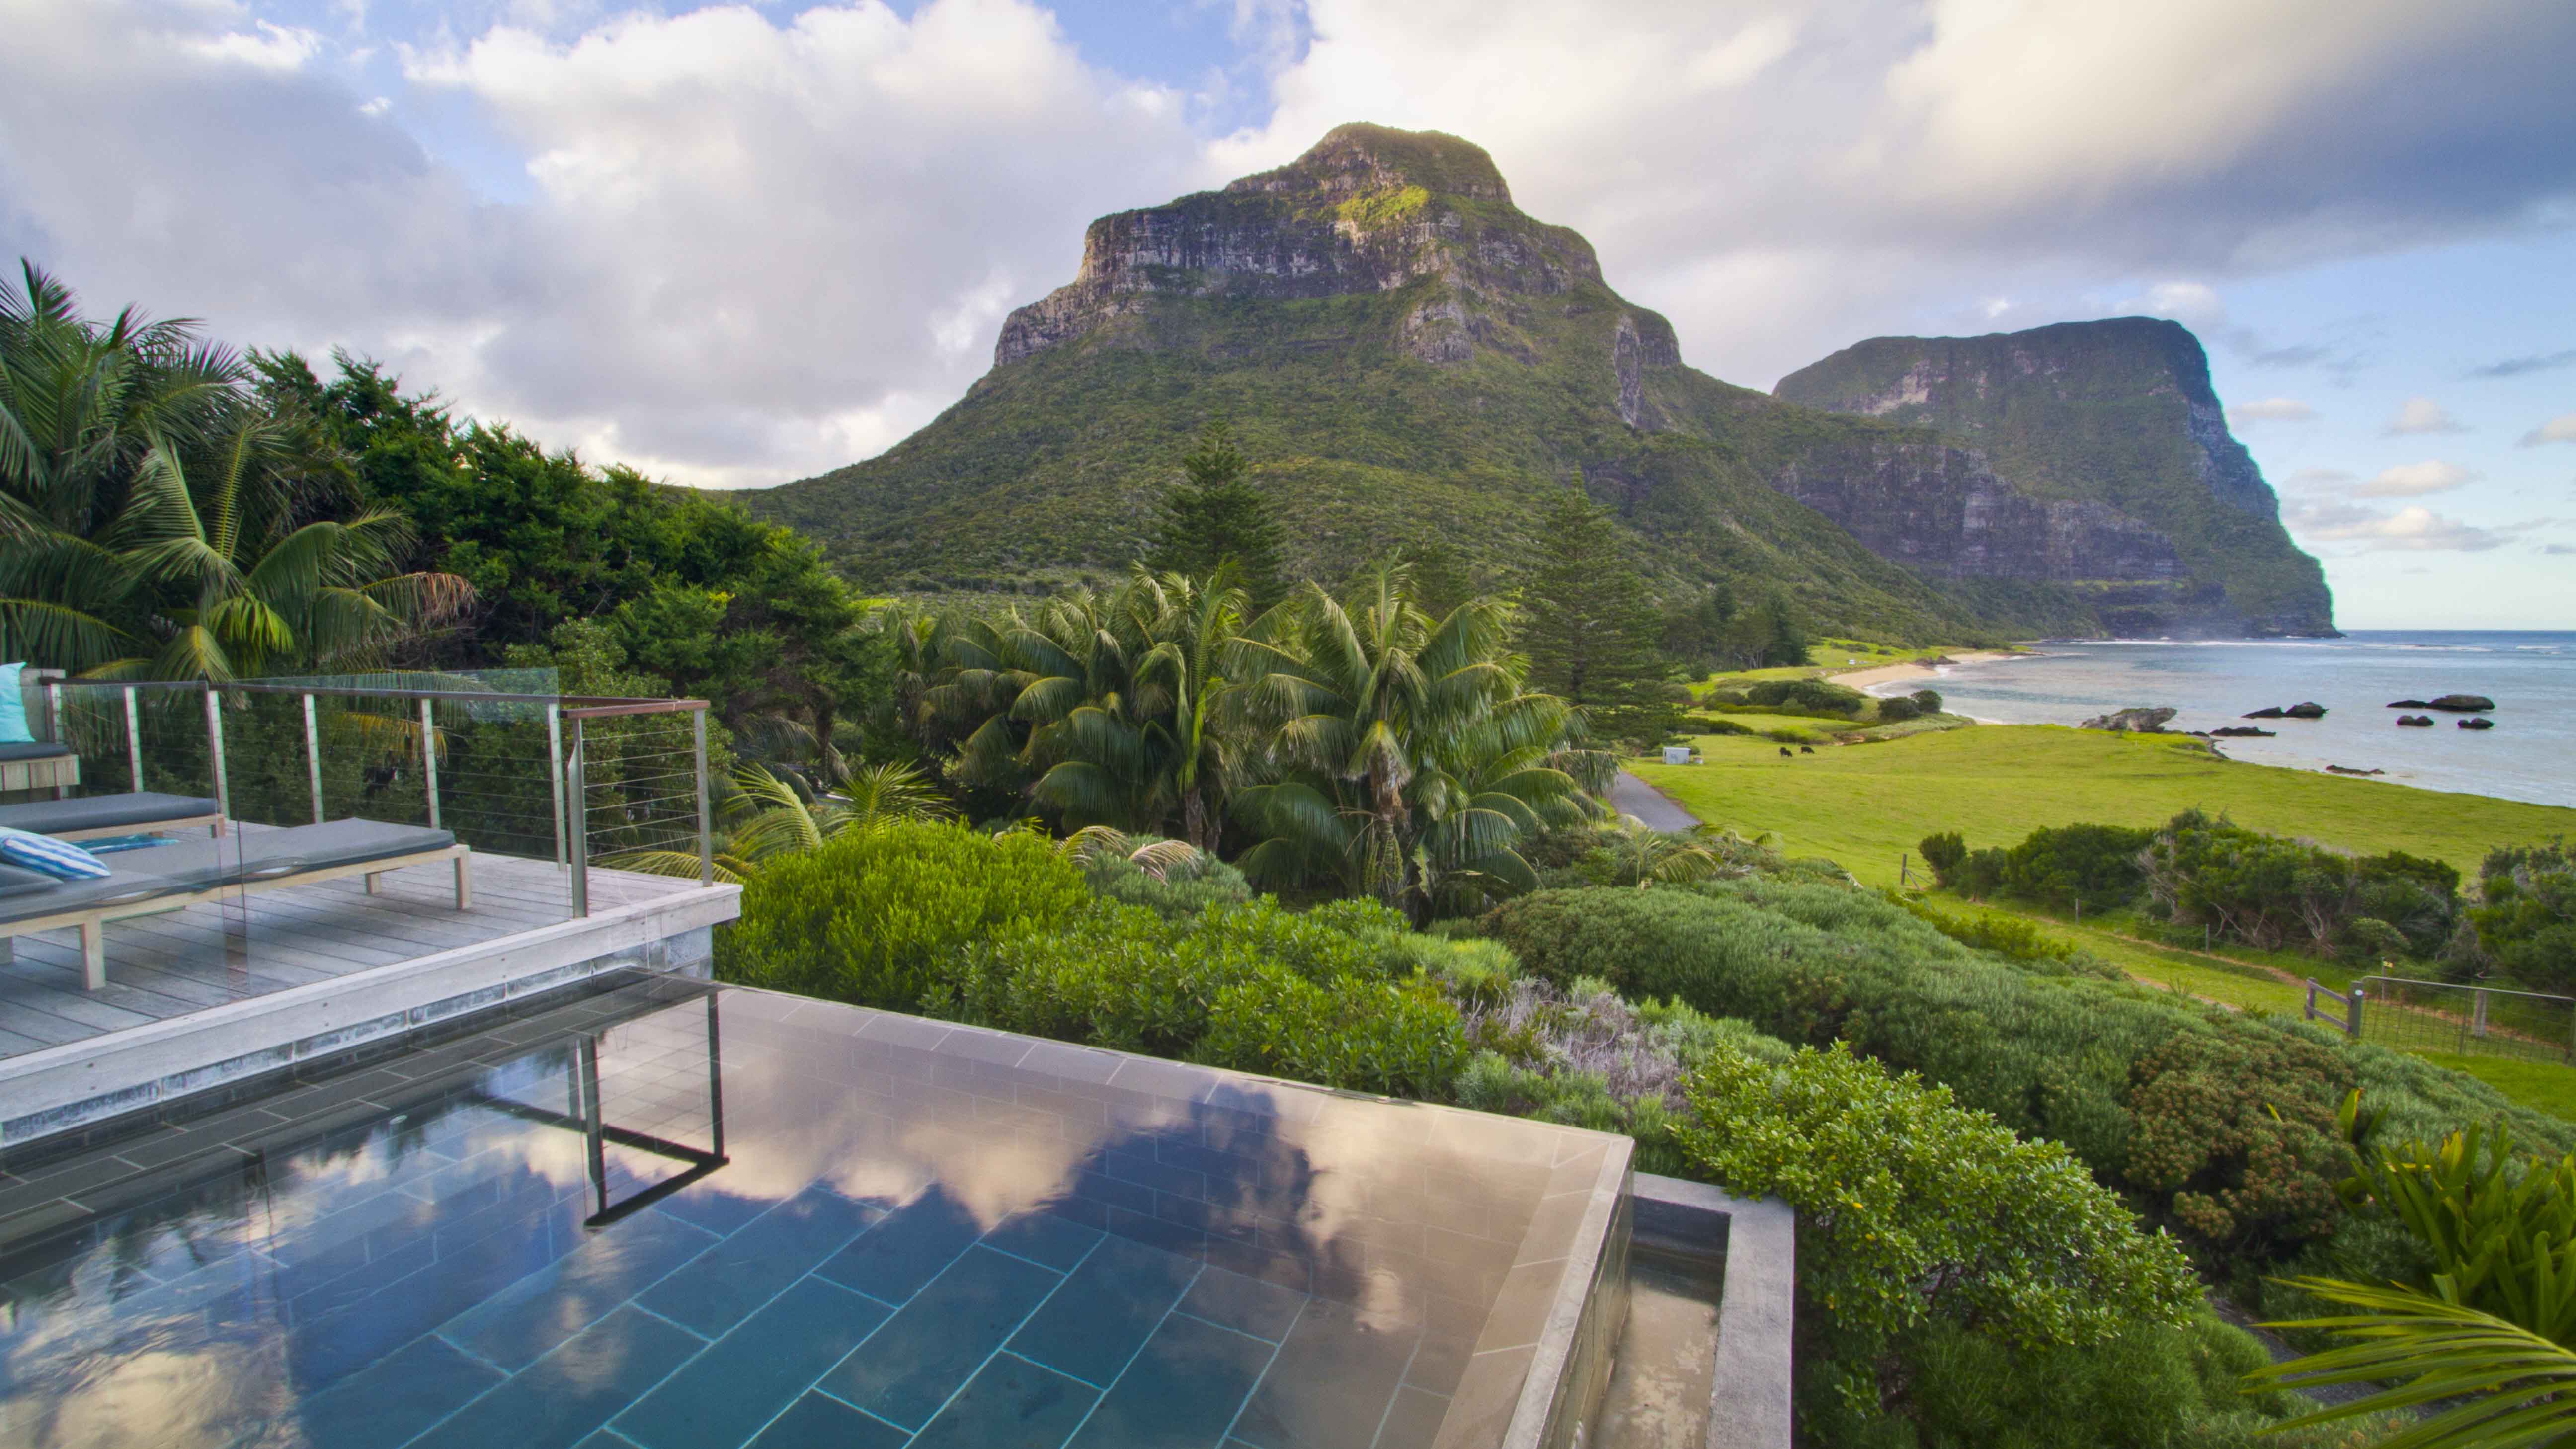 The 10 most stunning hotels in the world